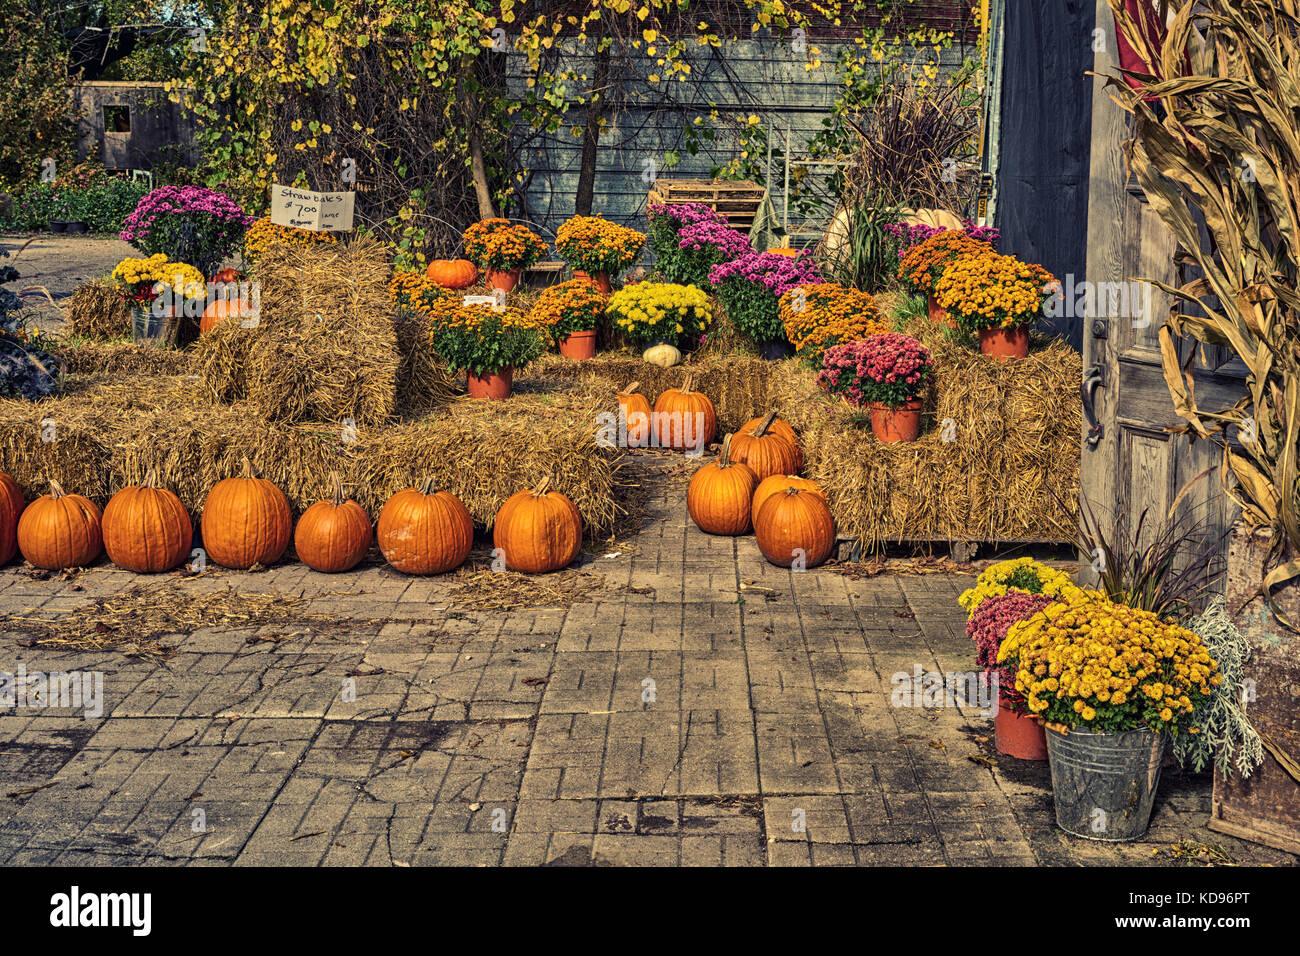 Fall Pumpkin and flower display Stock Photo